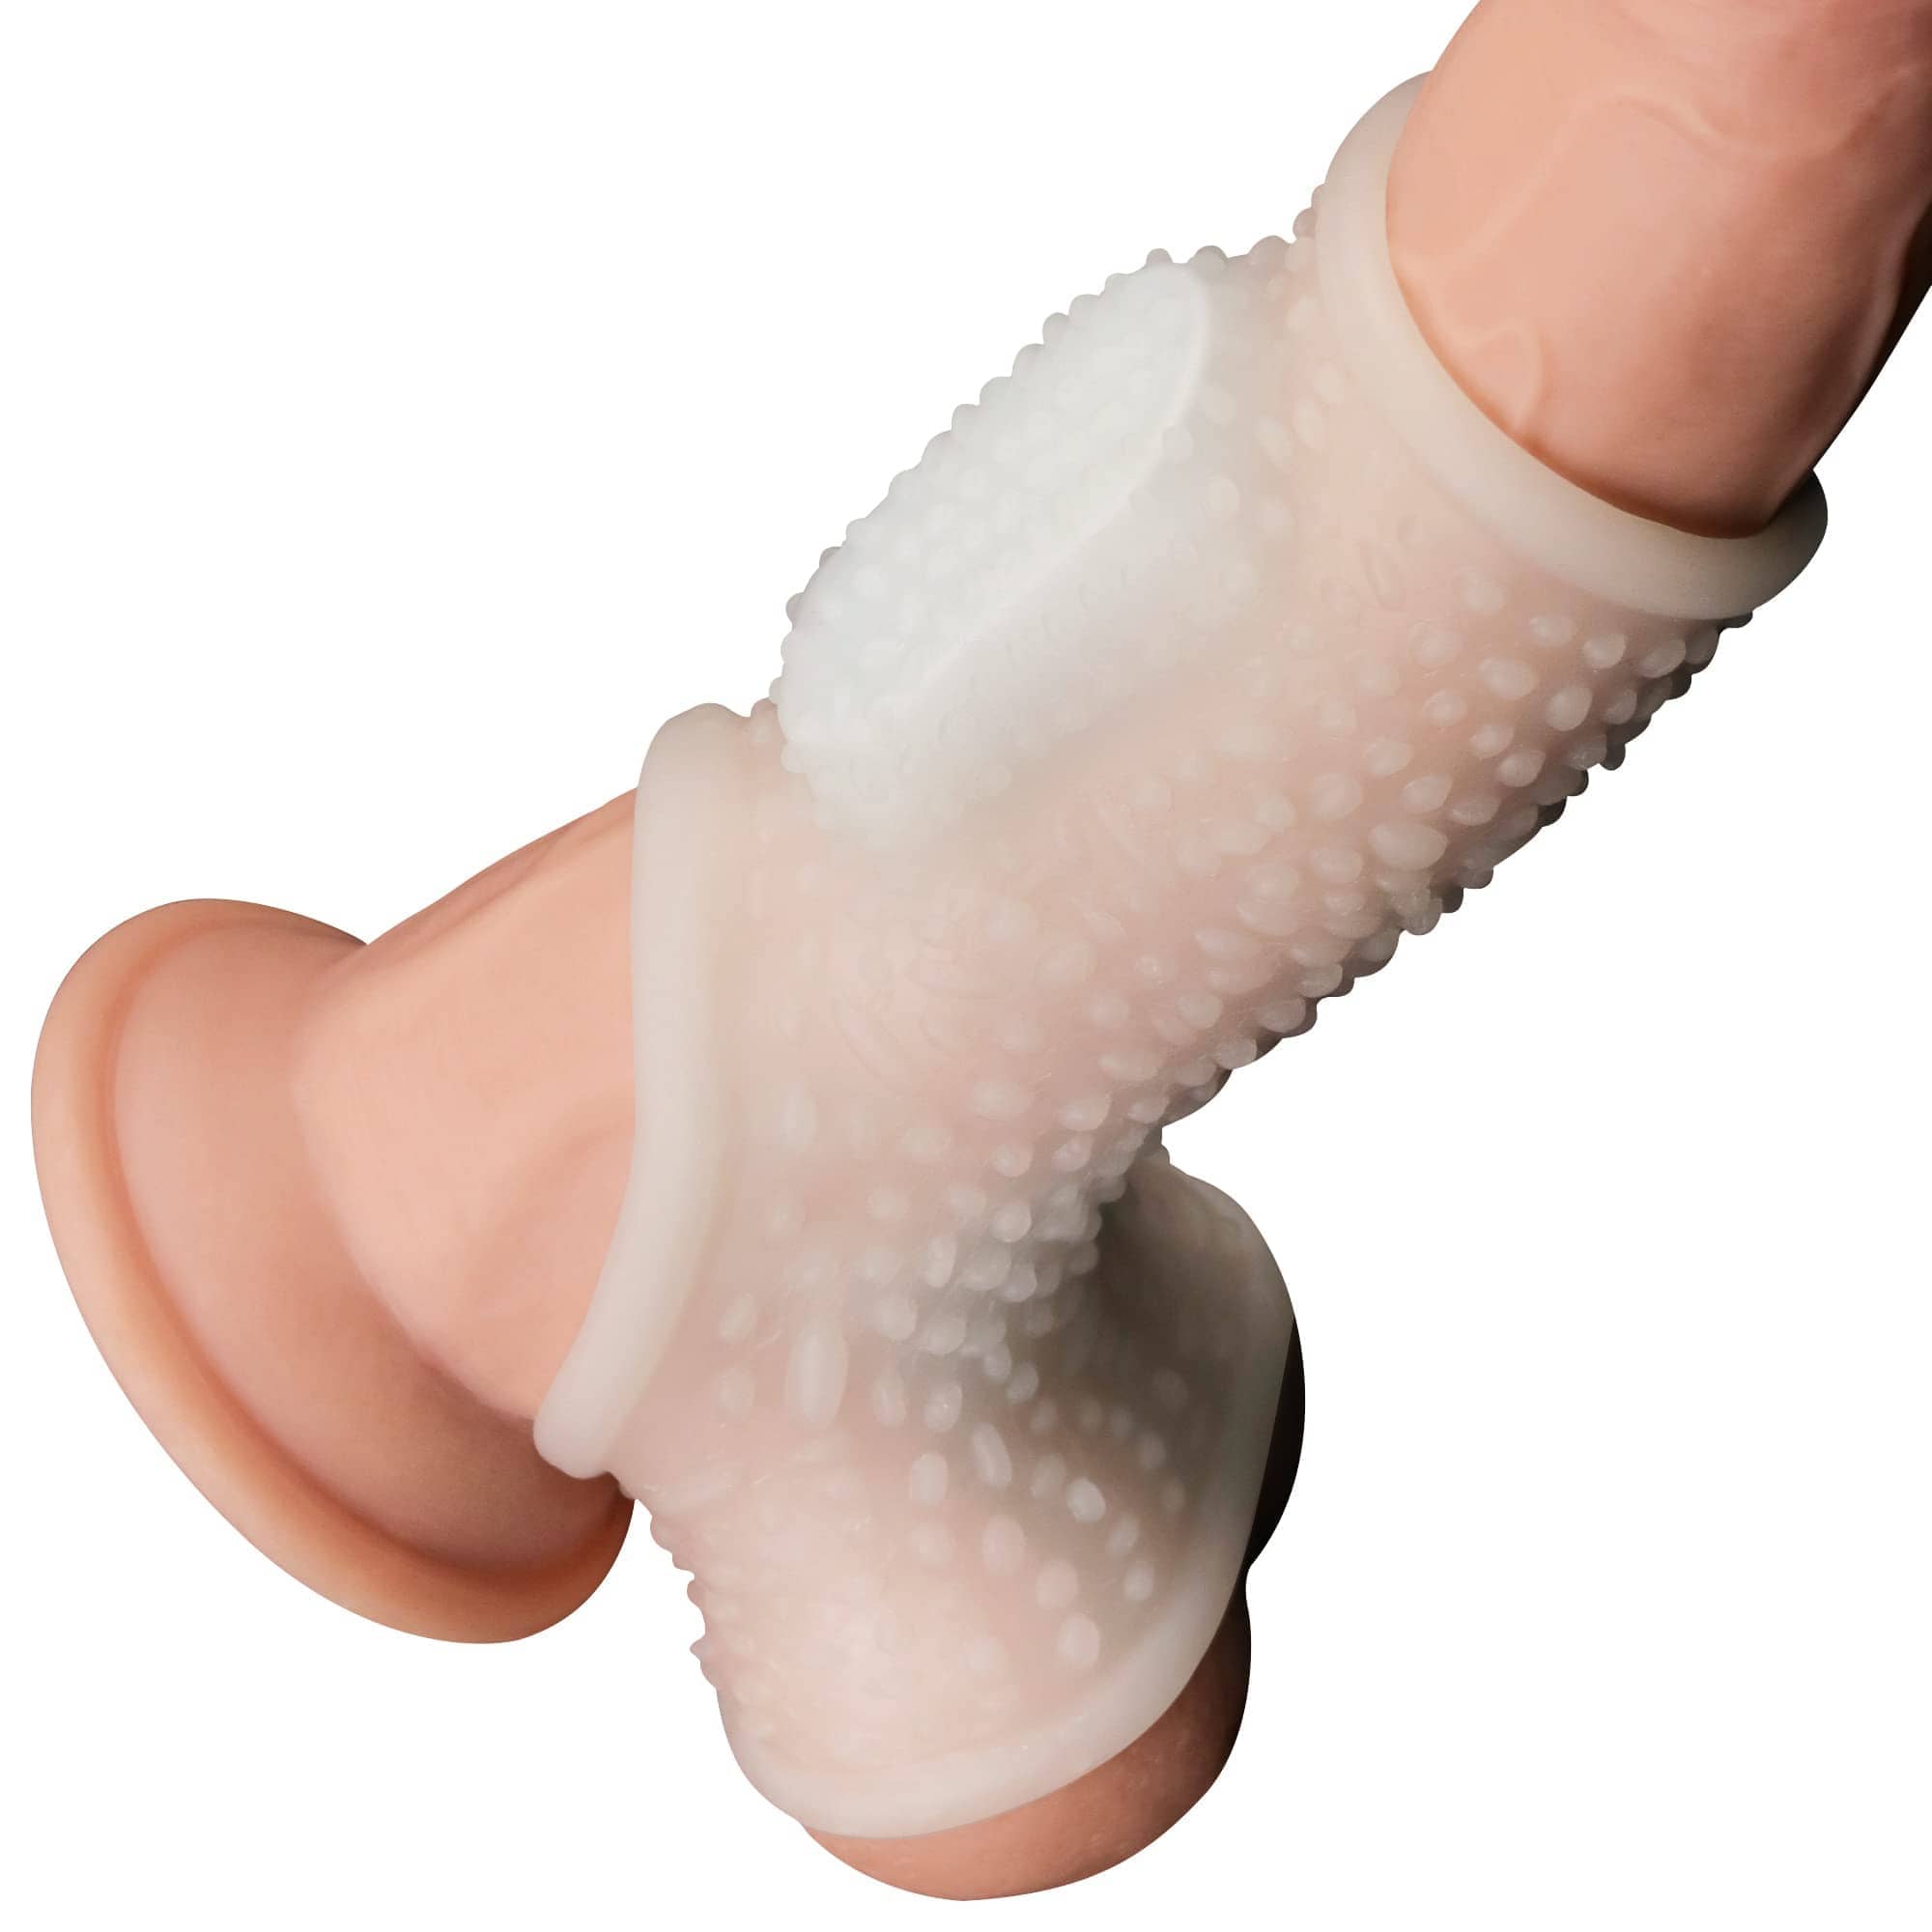 The vibrating drip cock sleeve with scrotum sleeve worn on dildo